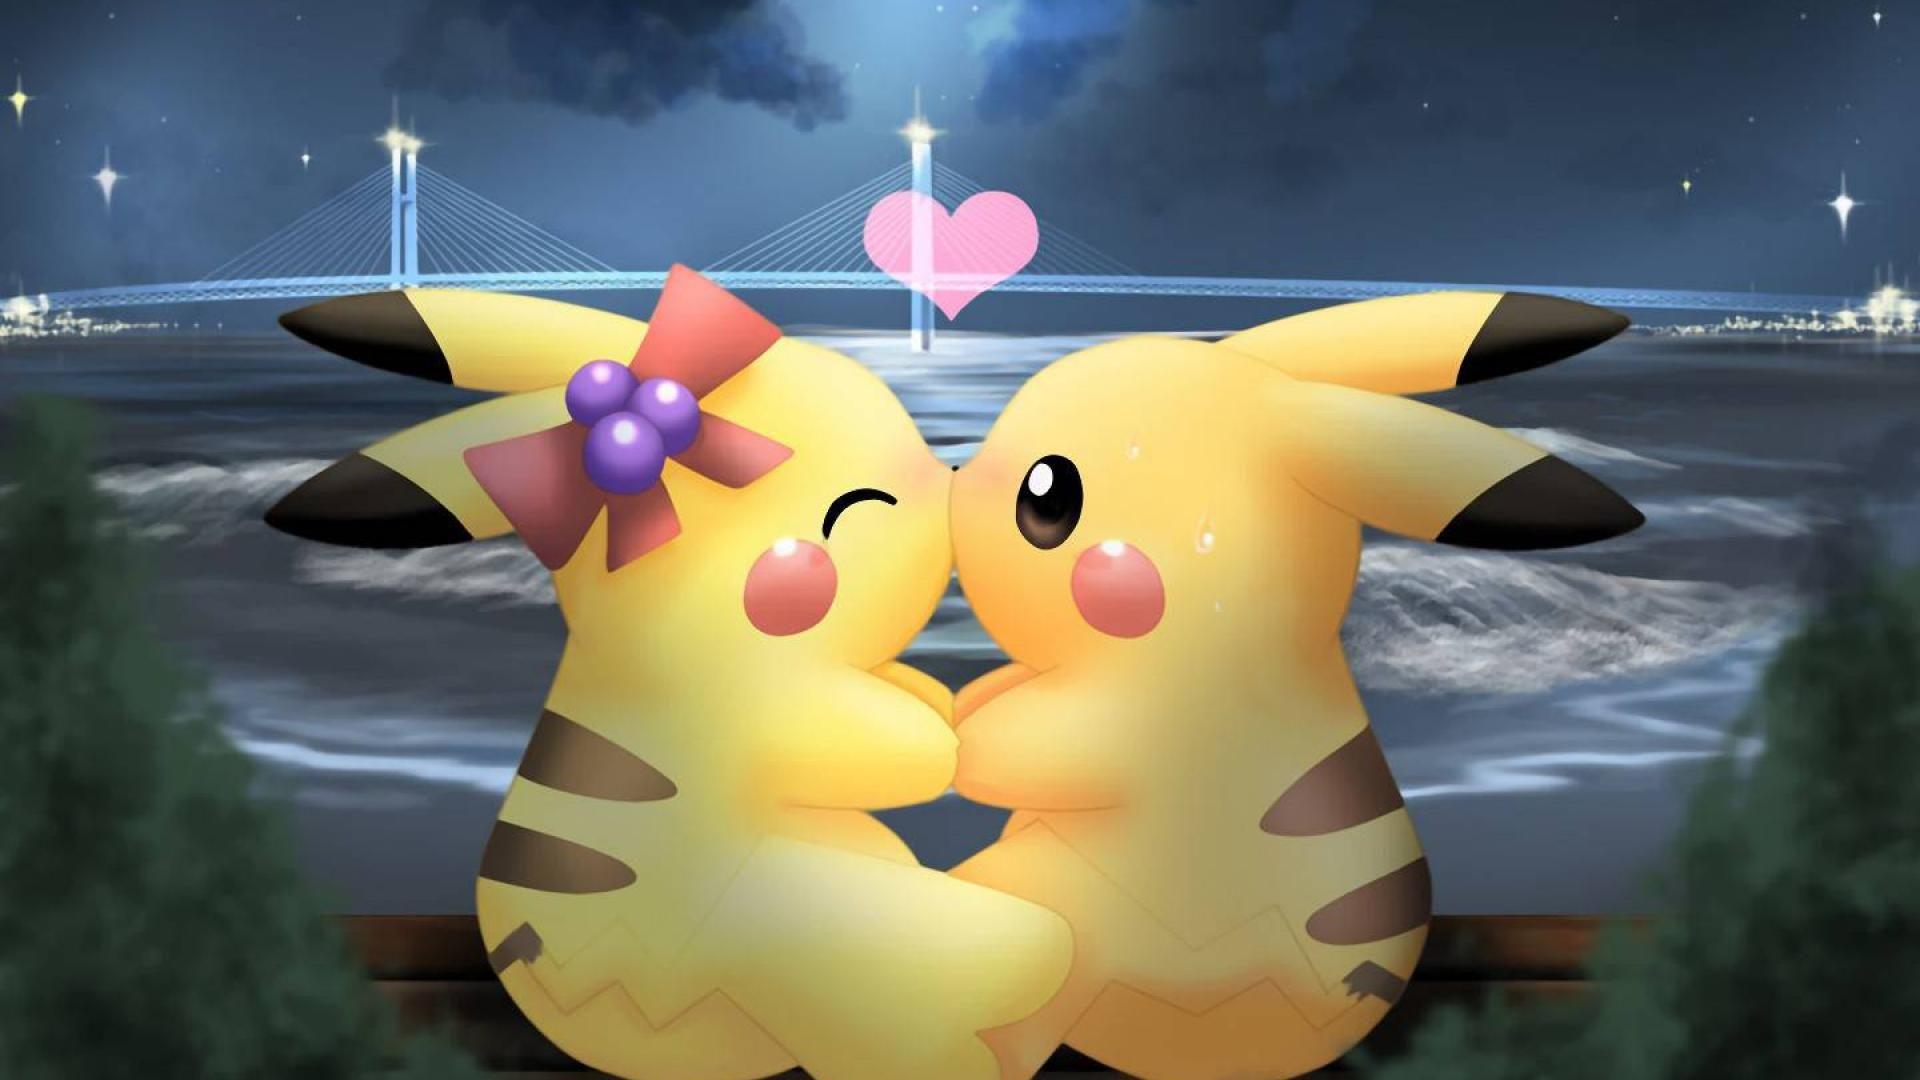 Love pikachu wallpaper - Quality and Resolution